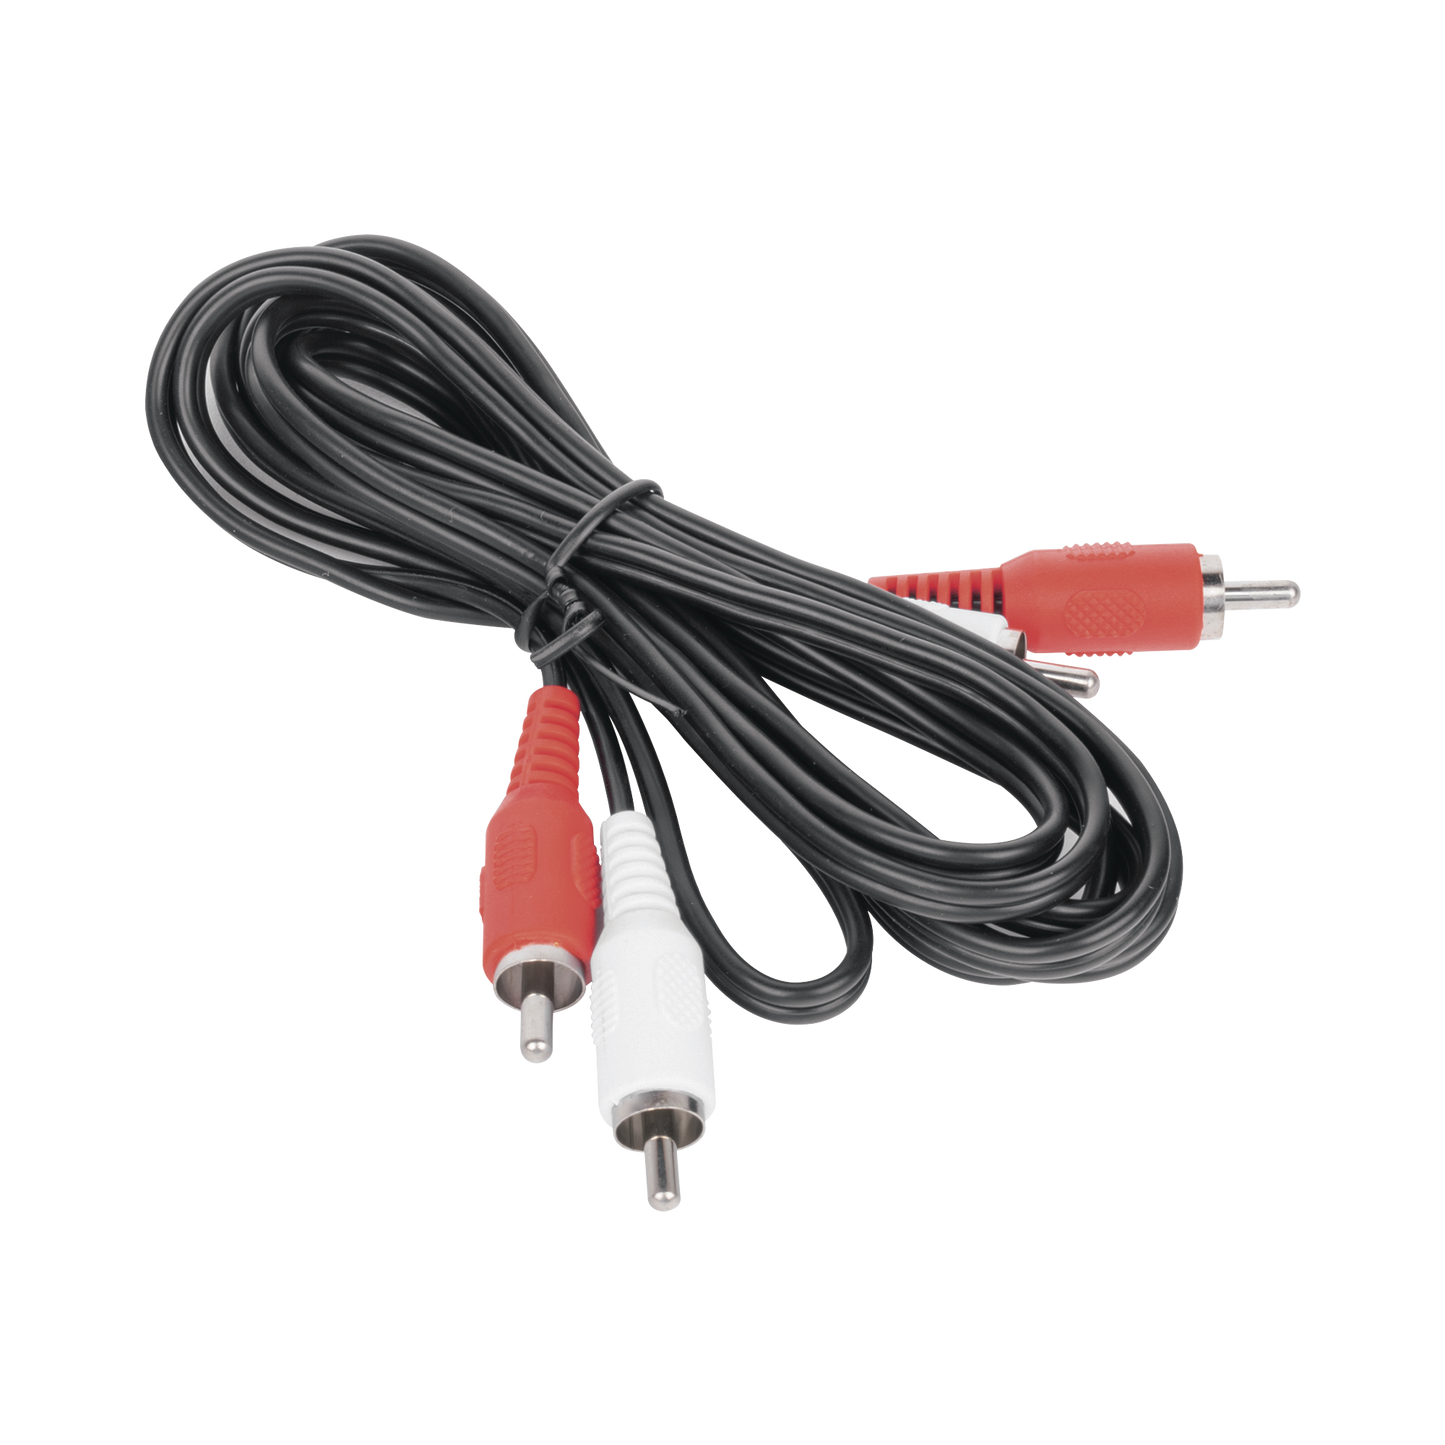 RCA Cable Male to Male 2 m Length, for Audio and Video Applications Optimized for HD